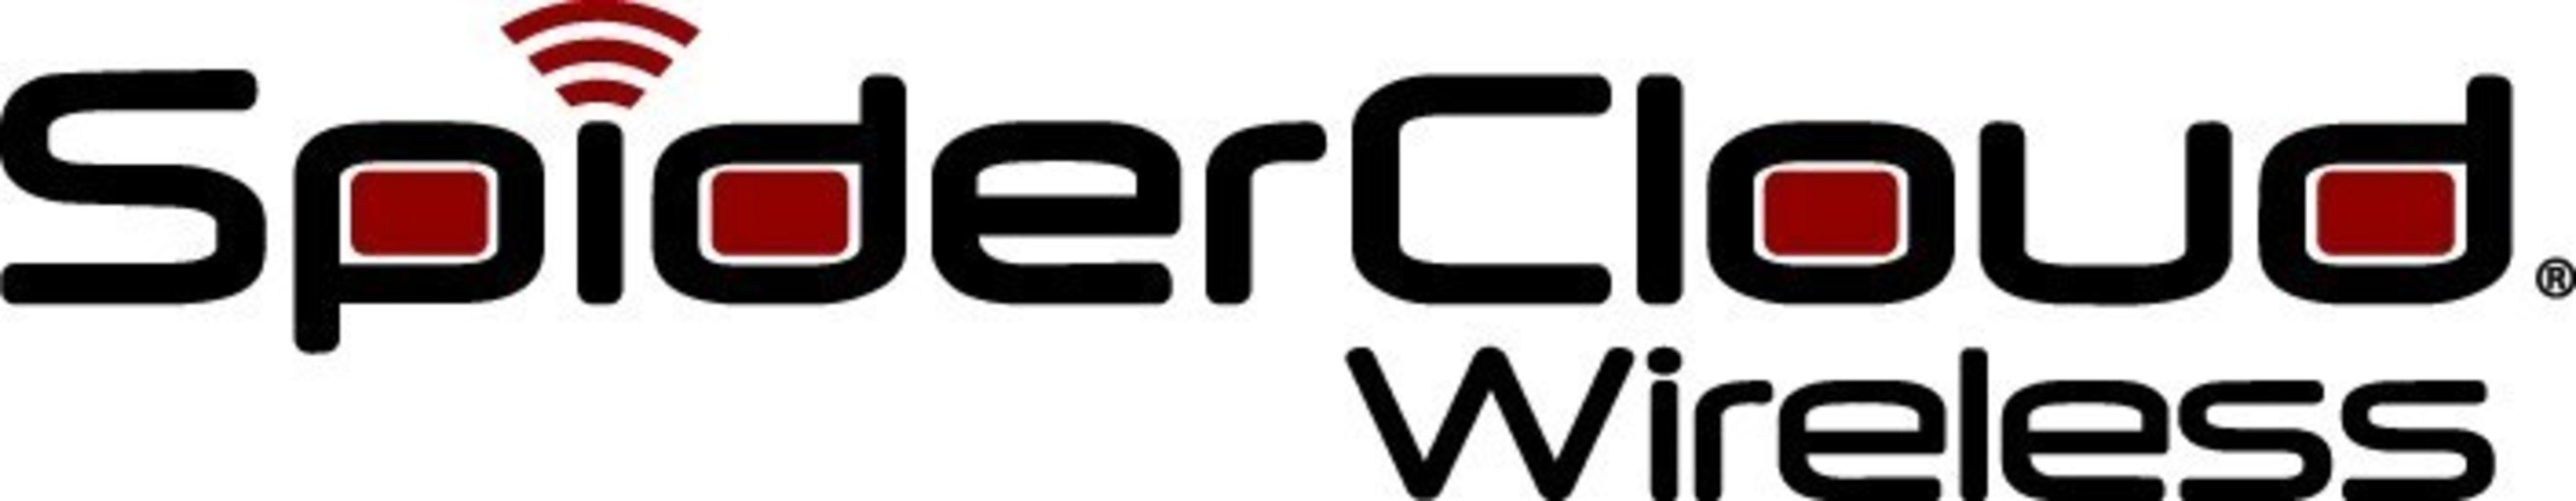 SpiderCloud Wireless to Supply Scalable 4G Small Cell Systems to Verizon Wireless